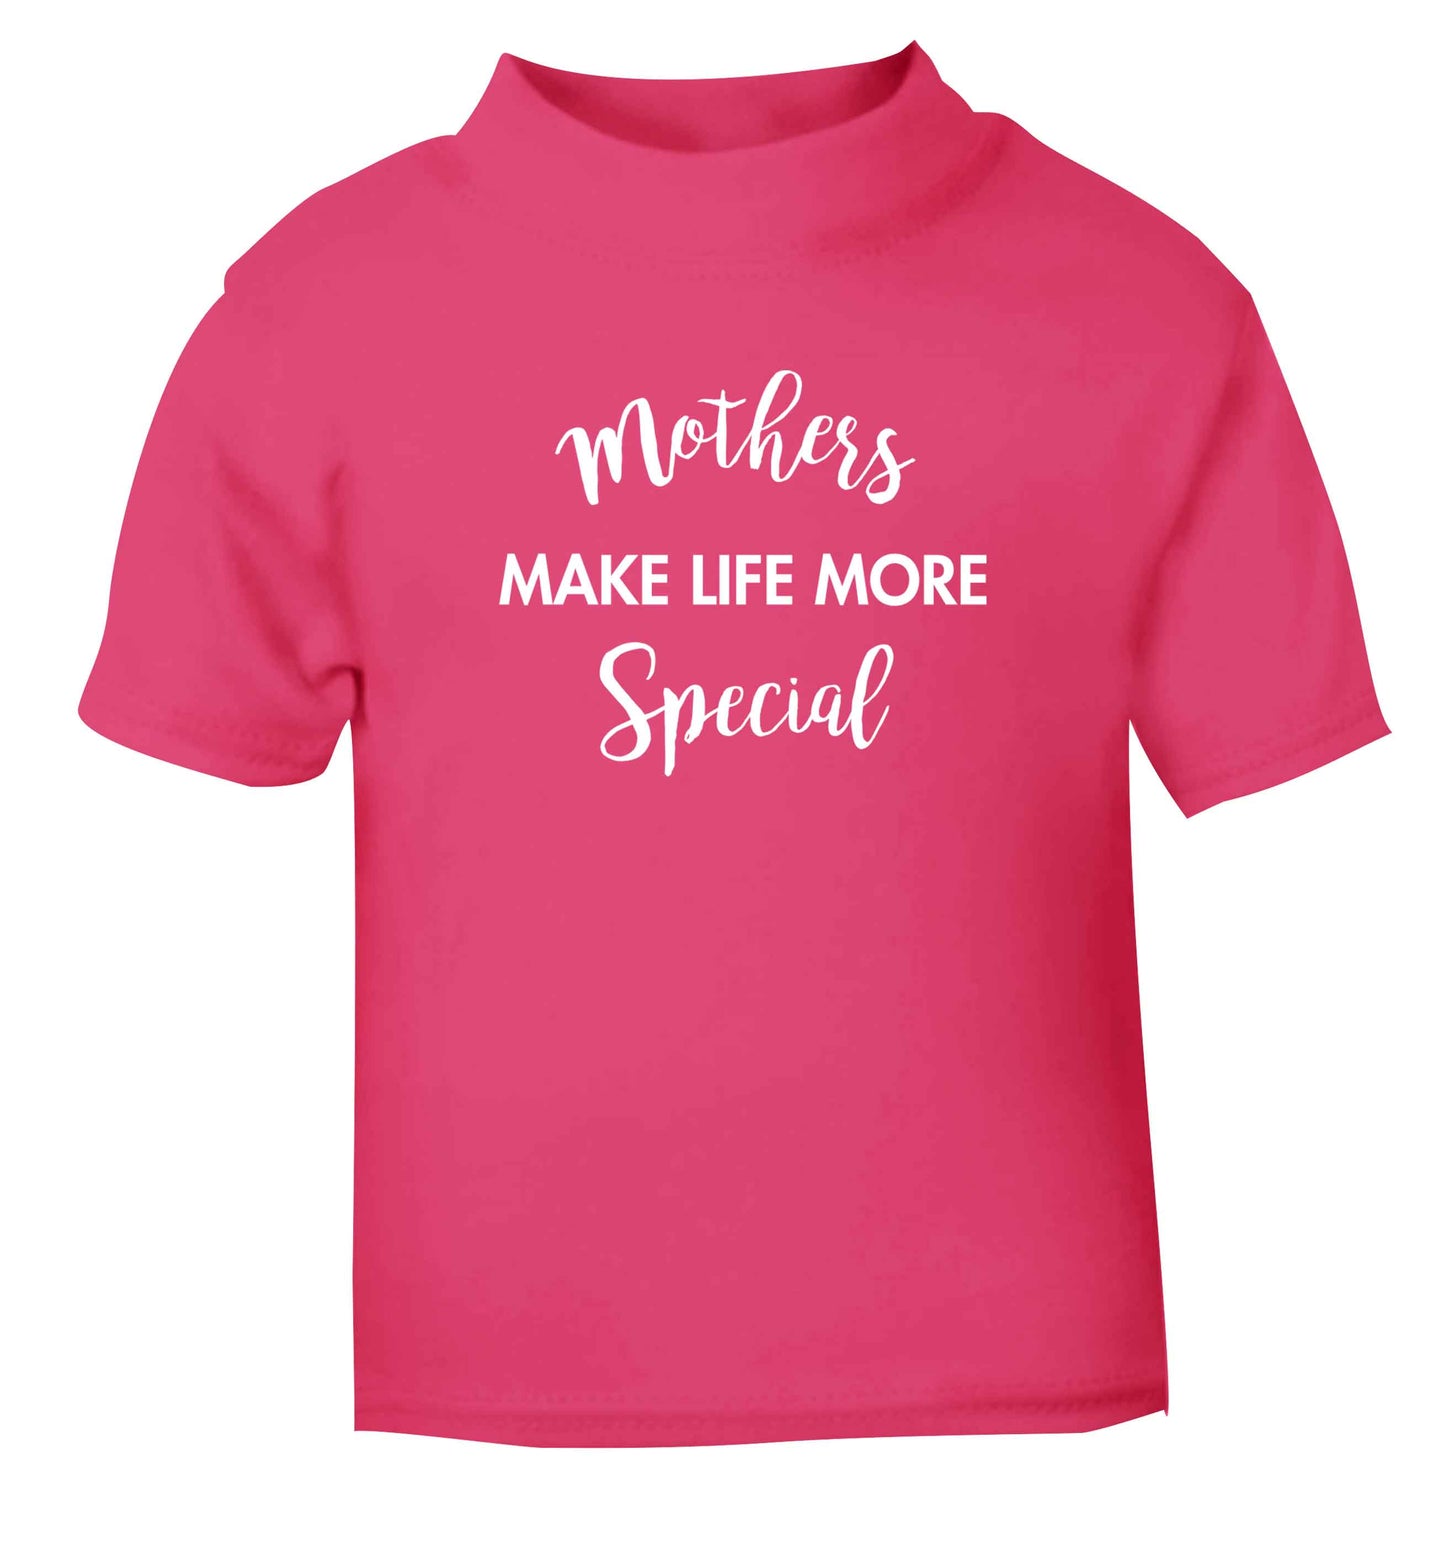 Mother's make life more special pink baby toddler Tshirt 2 Years